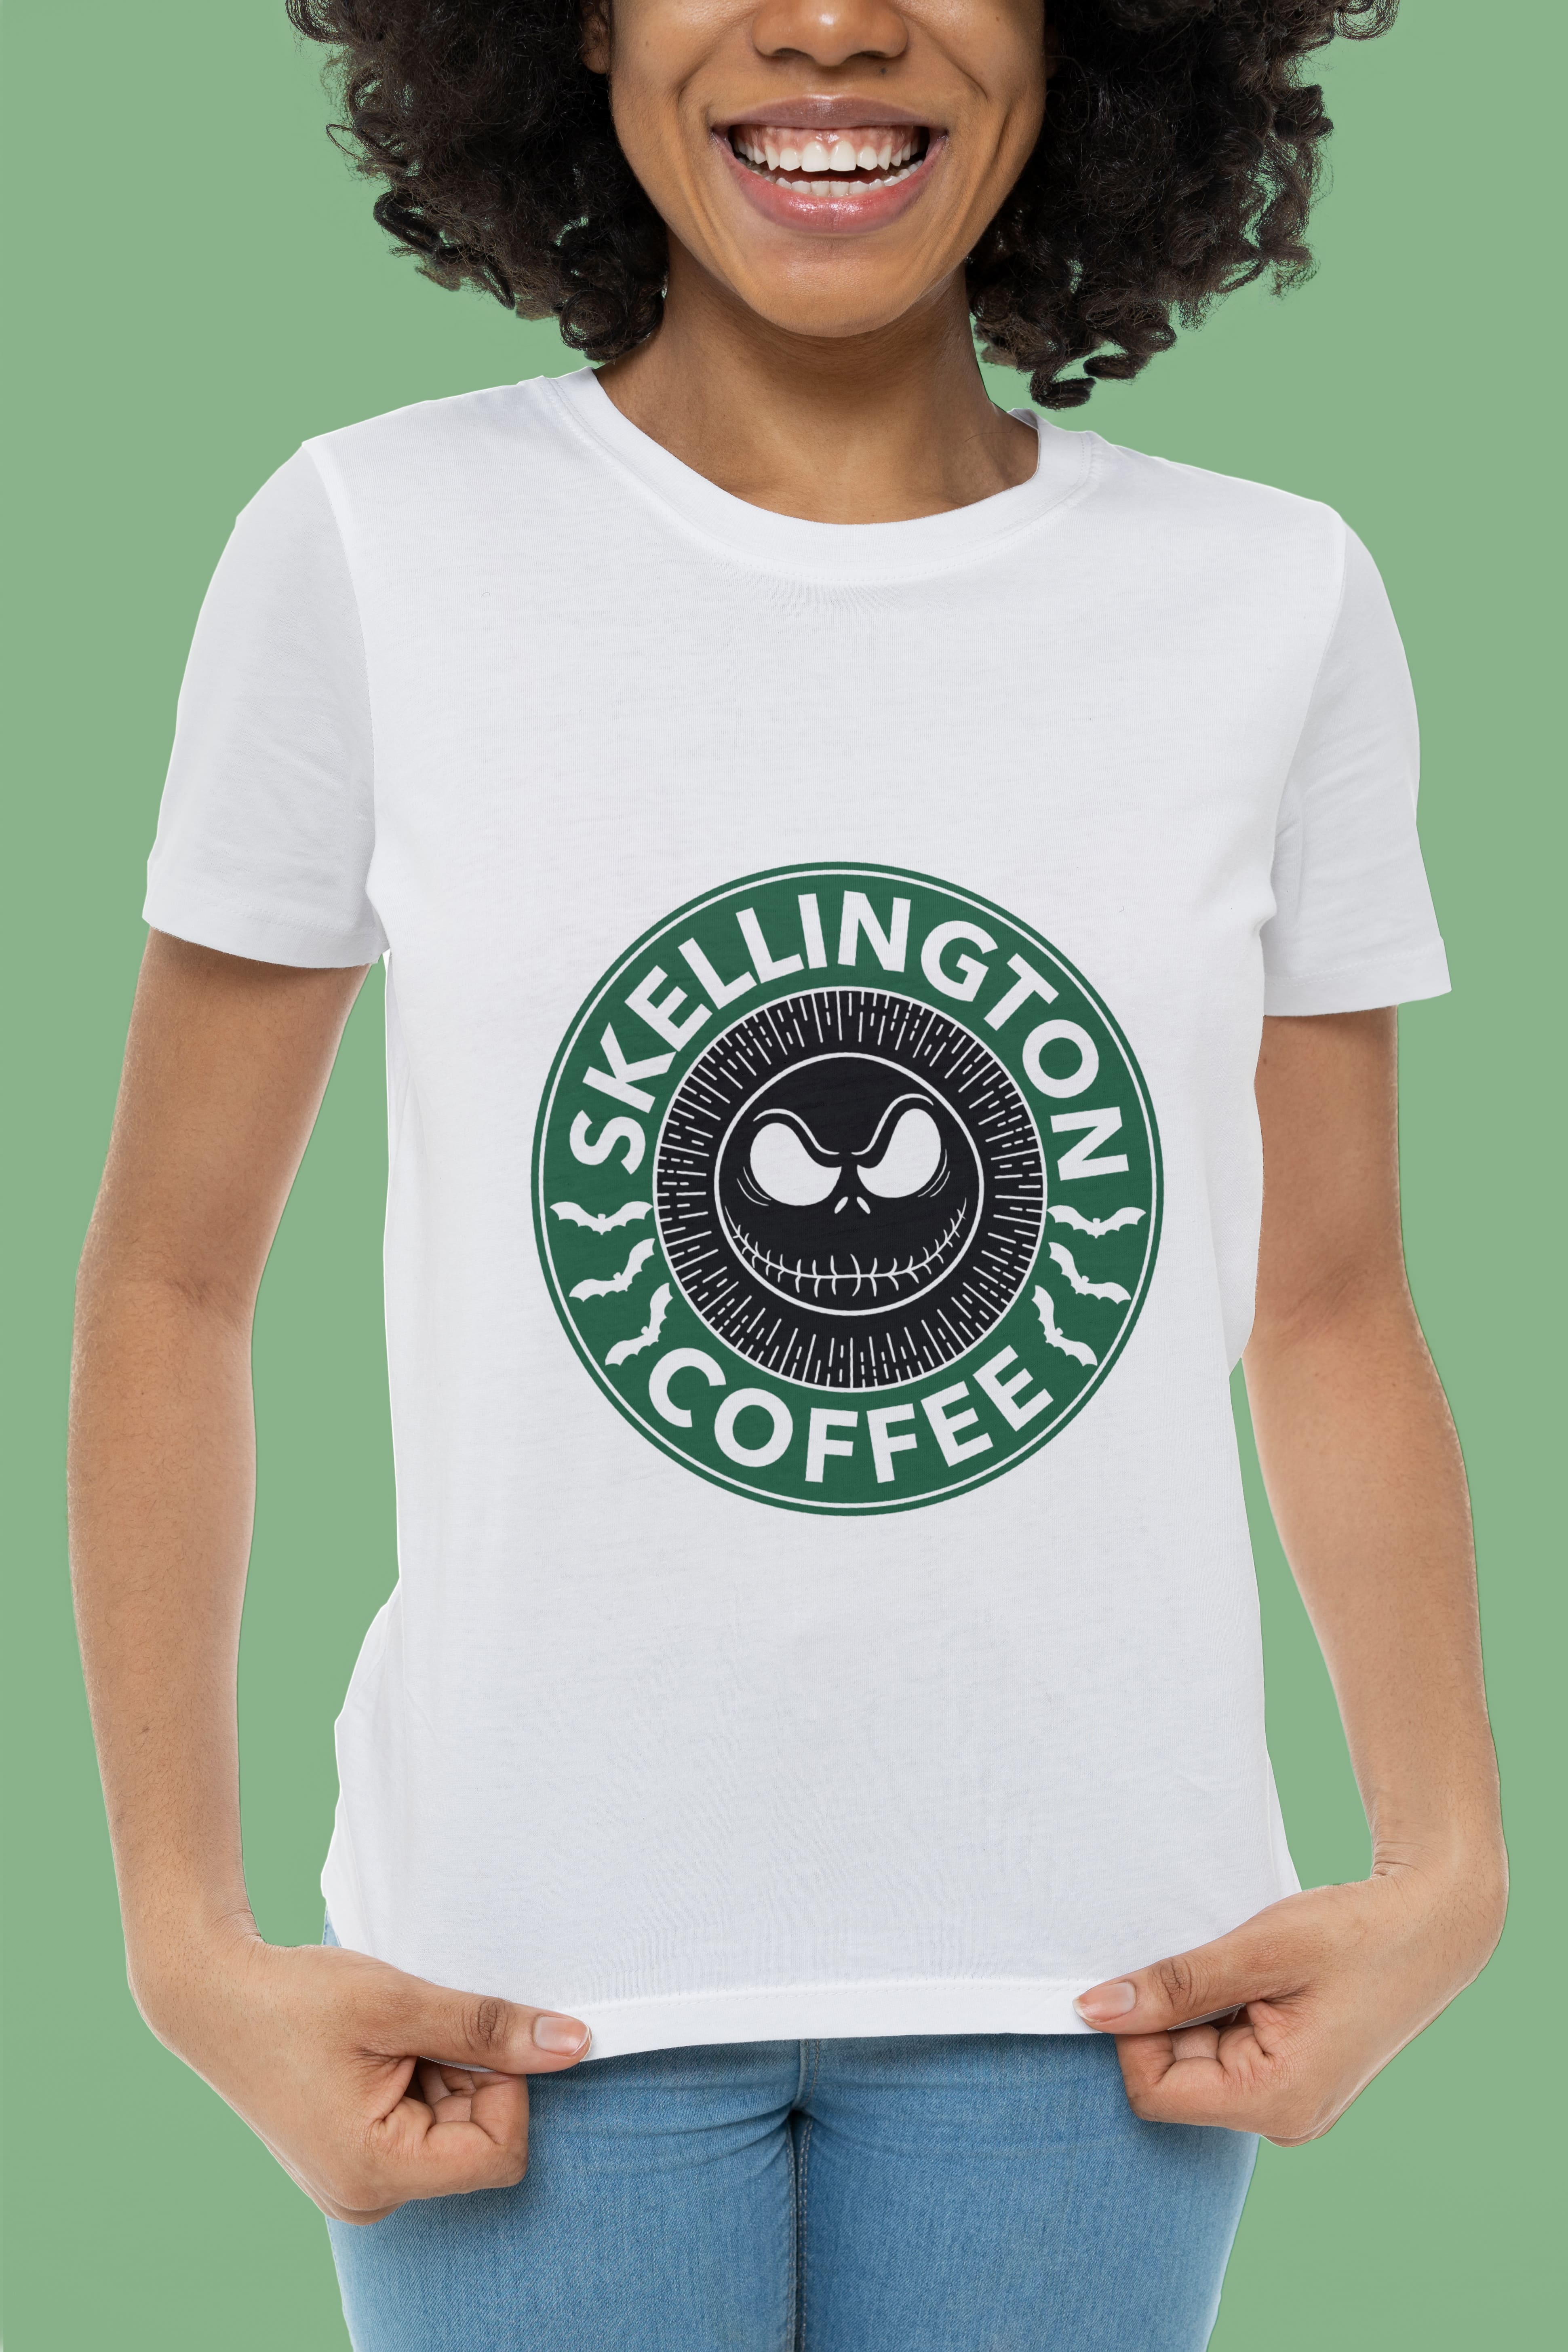 Girl in white t-shirt with jack skellington illustration on a black background in green round frame.